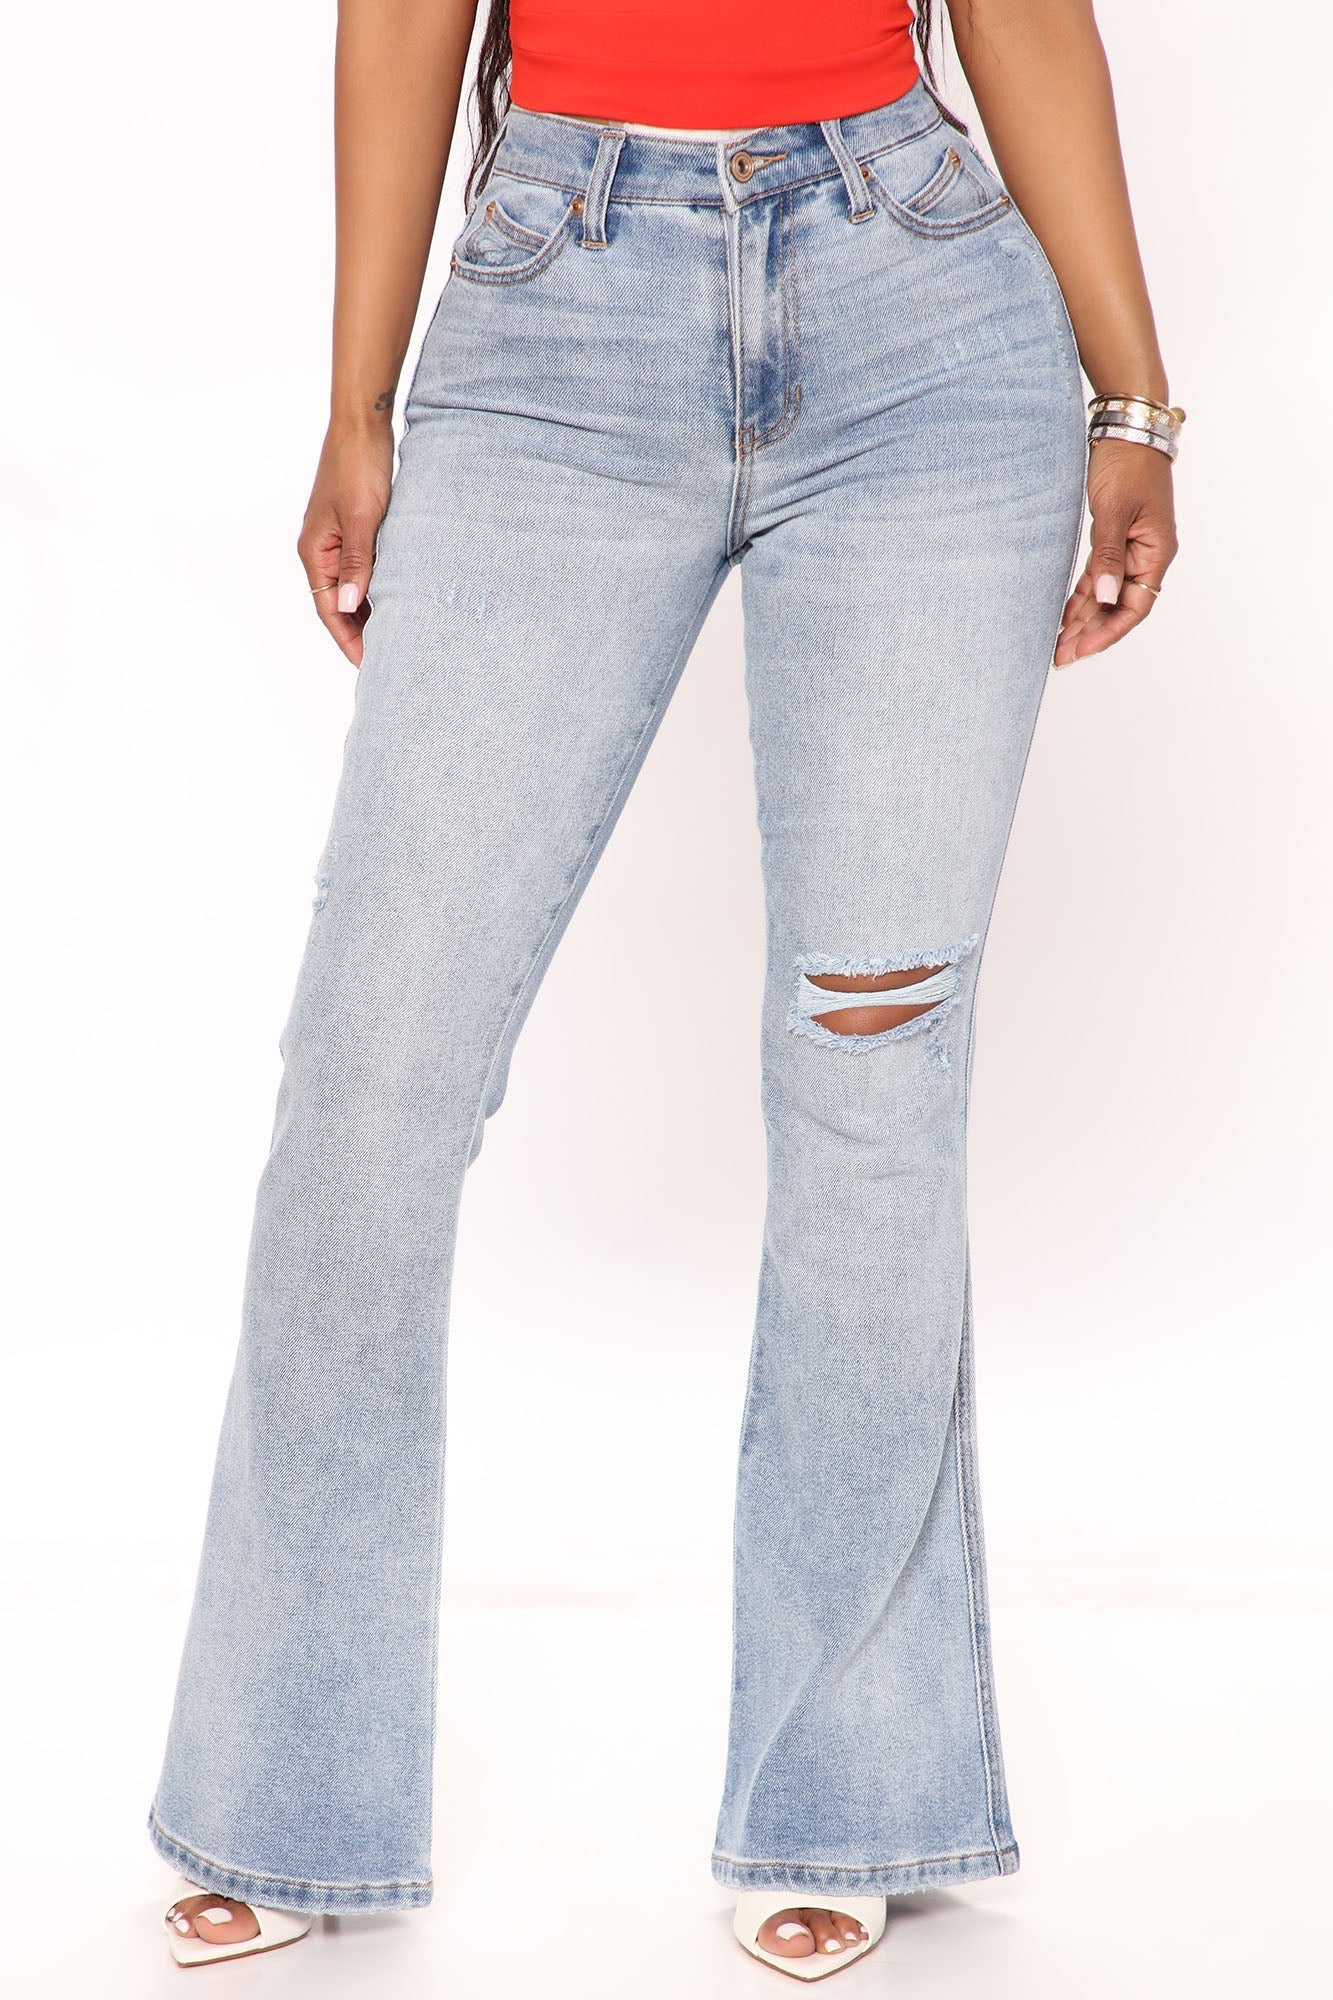 Two Step Distressed Flare Jeans - Light Blue Wash